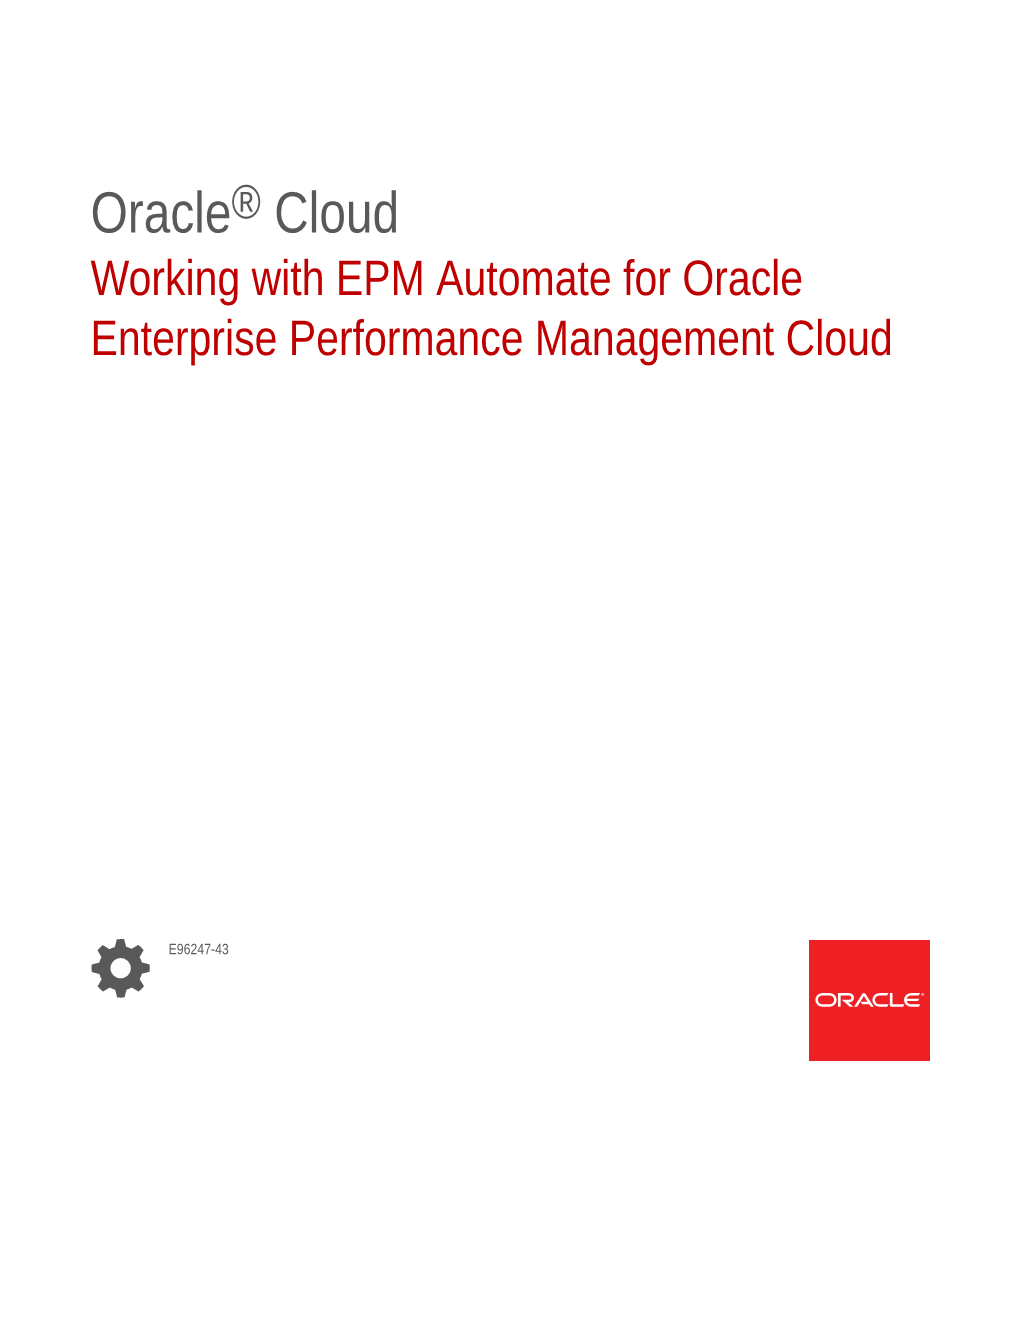 Working with EPM Automate for Oracle Enterprise Performance Management Cloud